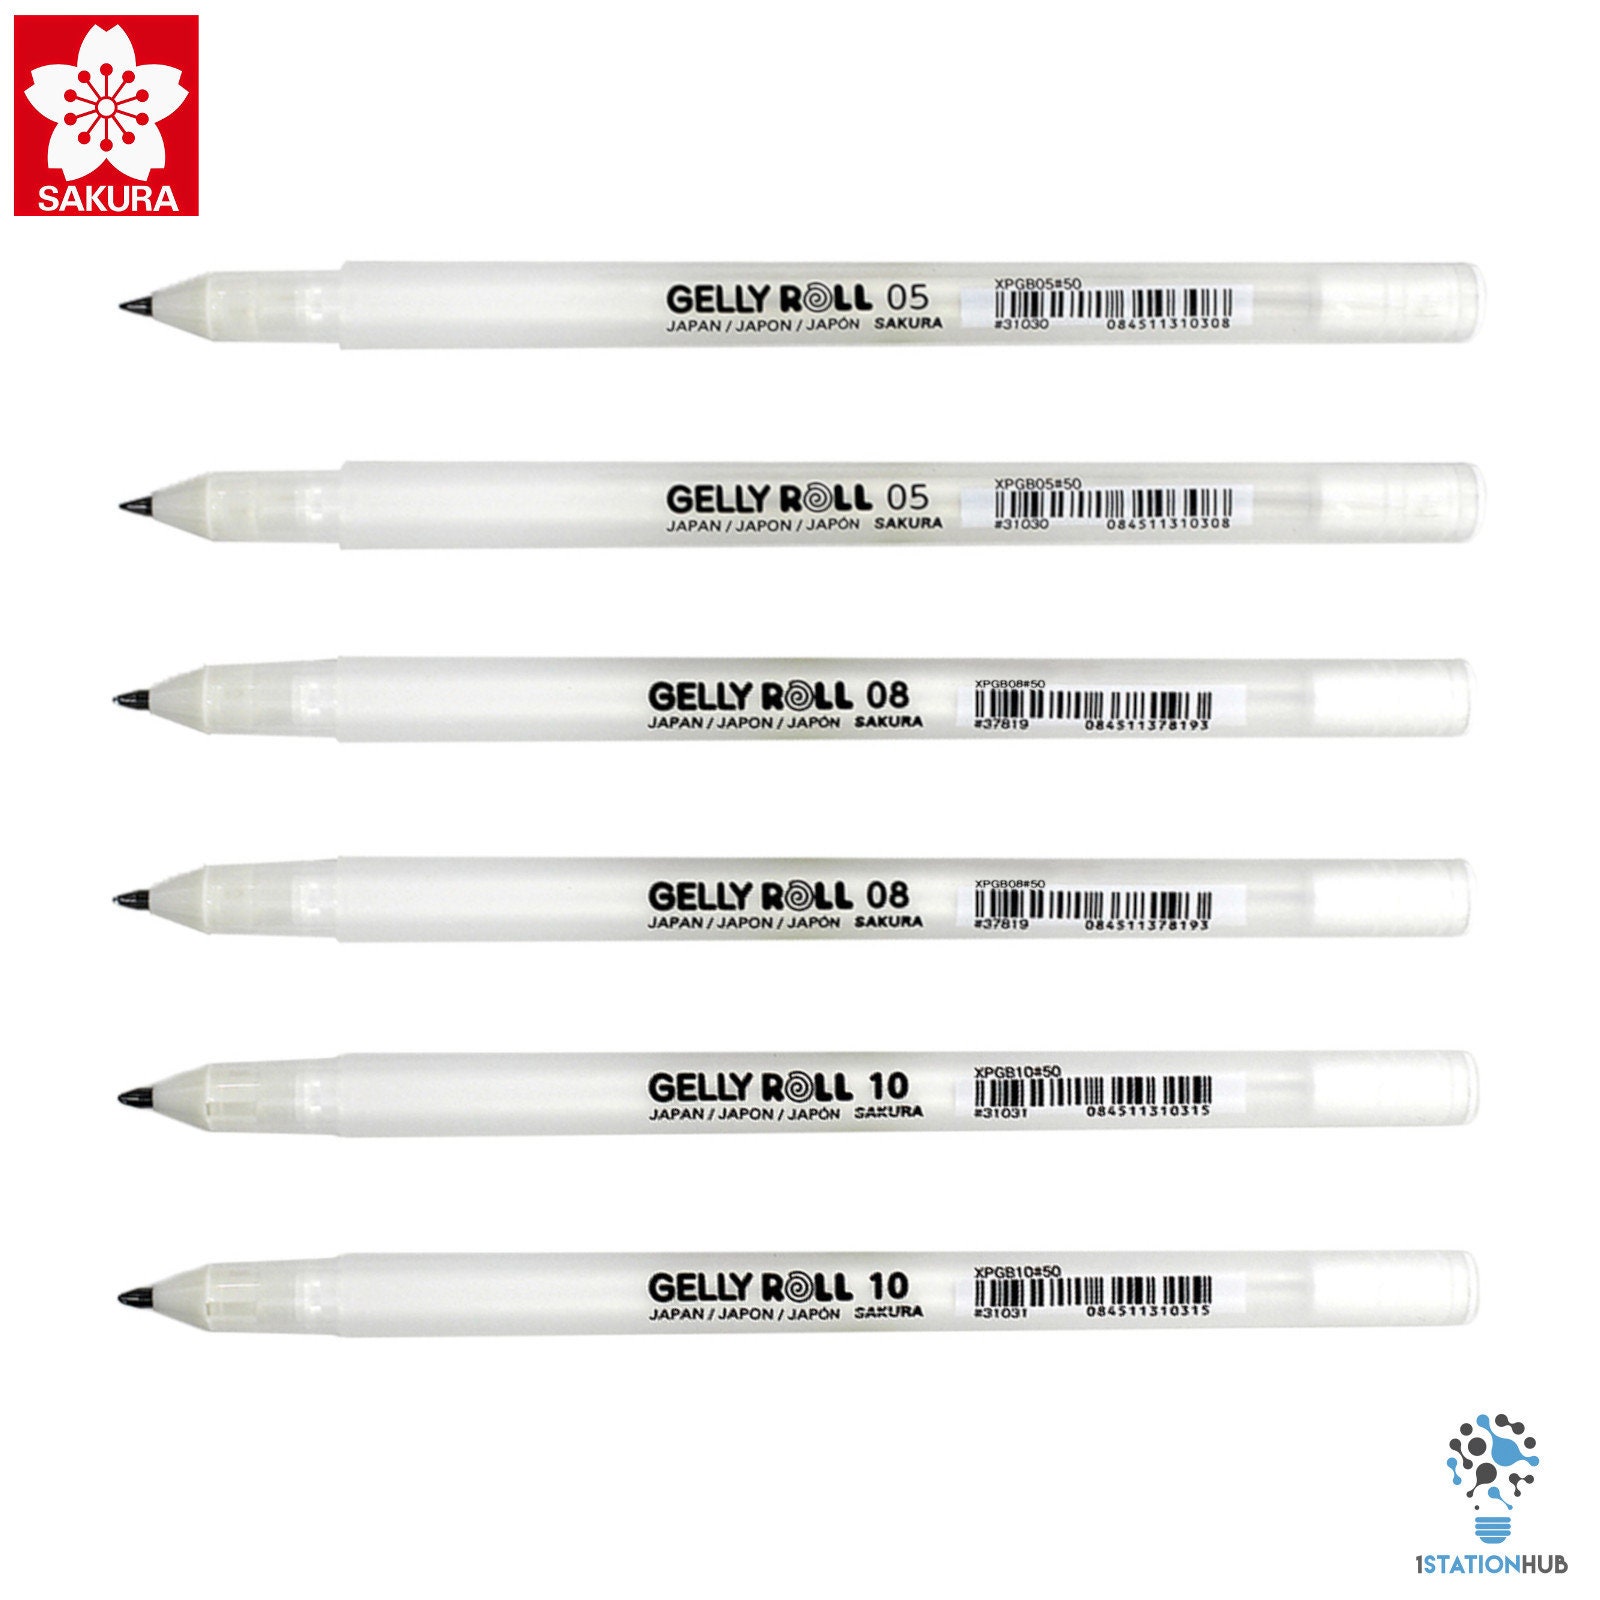 SAKURA Gelly Roll Gel Pens - Bold Tip Ink Pen for Journaling, Art, or  Drawing - Classic White Ink - 6 Pack